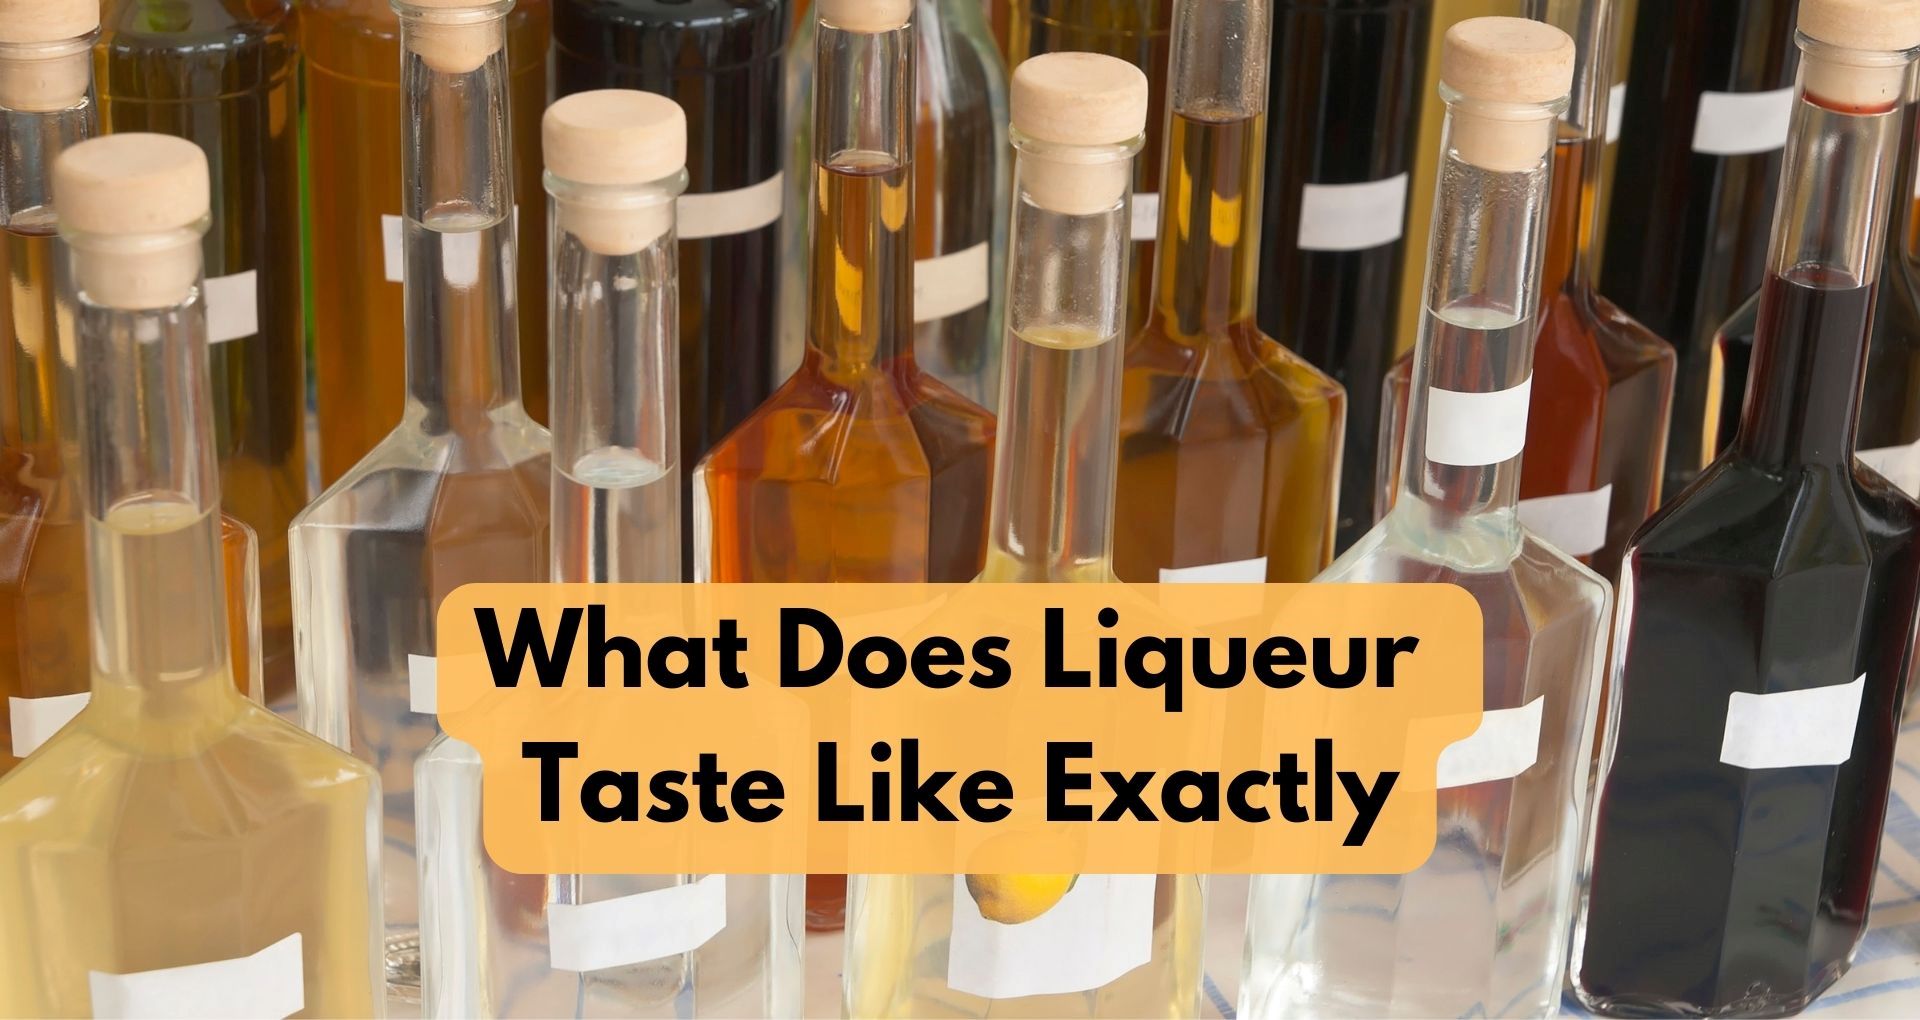 What Does Liqueur Taste Like Exactly?